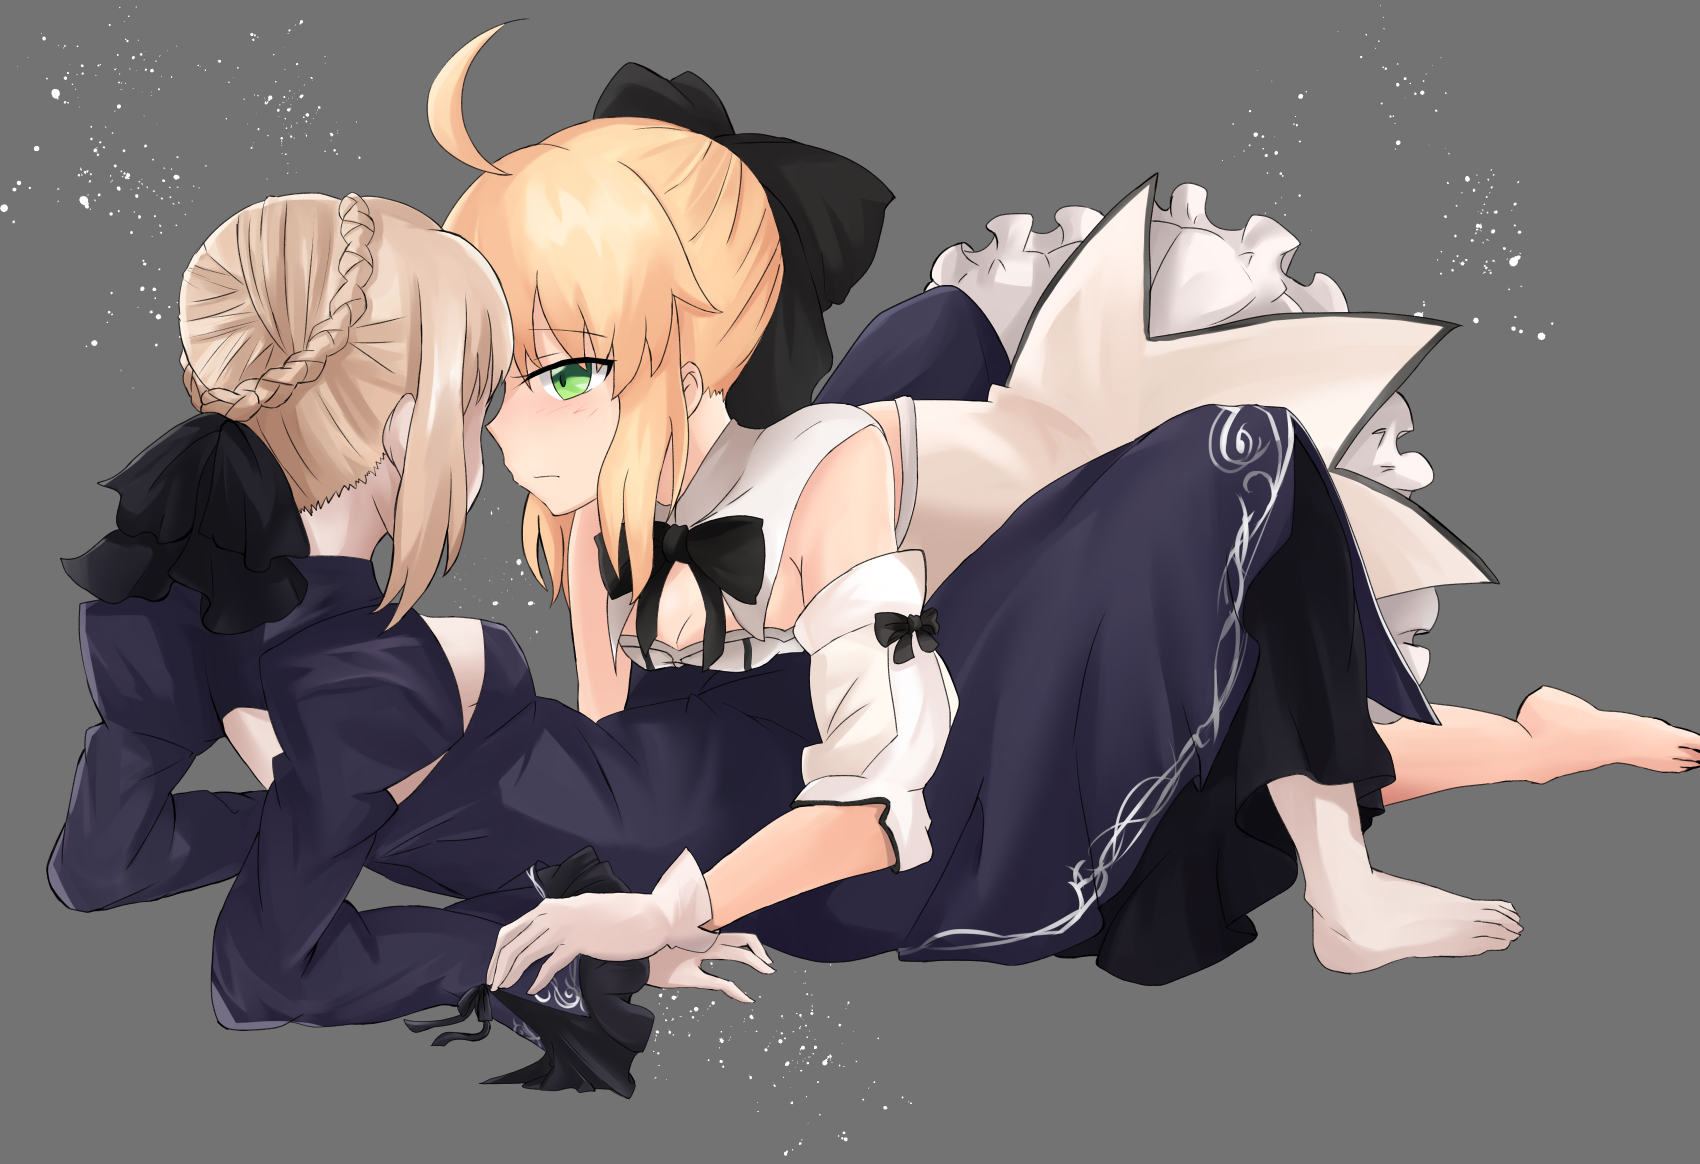 Anime 1700x1164 anime anime girls yuri Fate series Fate/Stay Night Fate/Stay Night: Unlimited Blade Works Fate/Unlimited Codes  blonde Artoria Pendragon Saber Alter Saber Lily